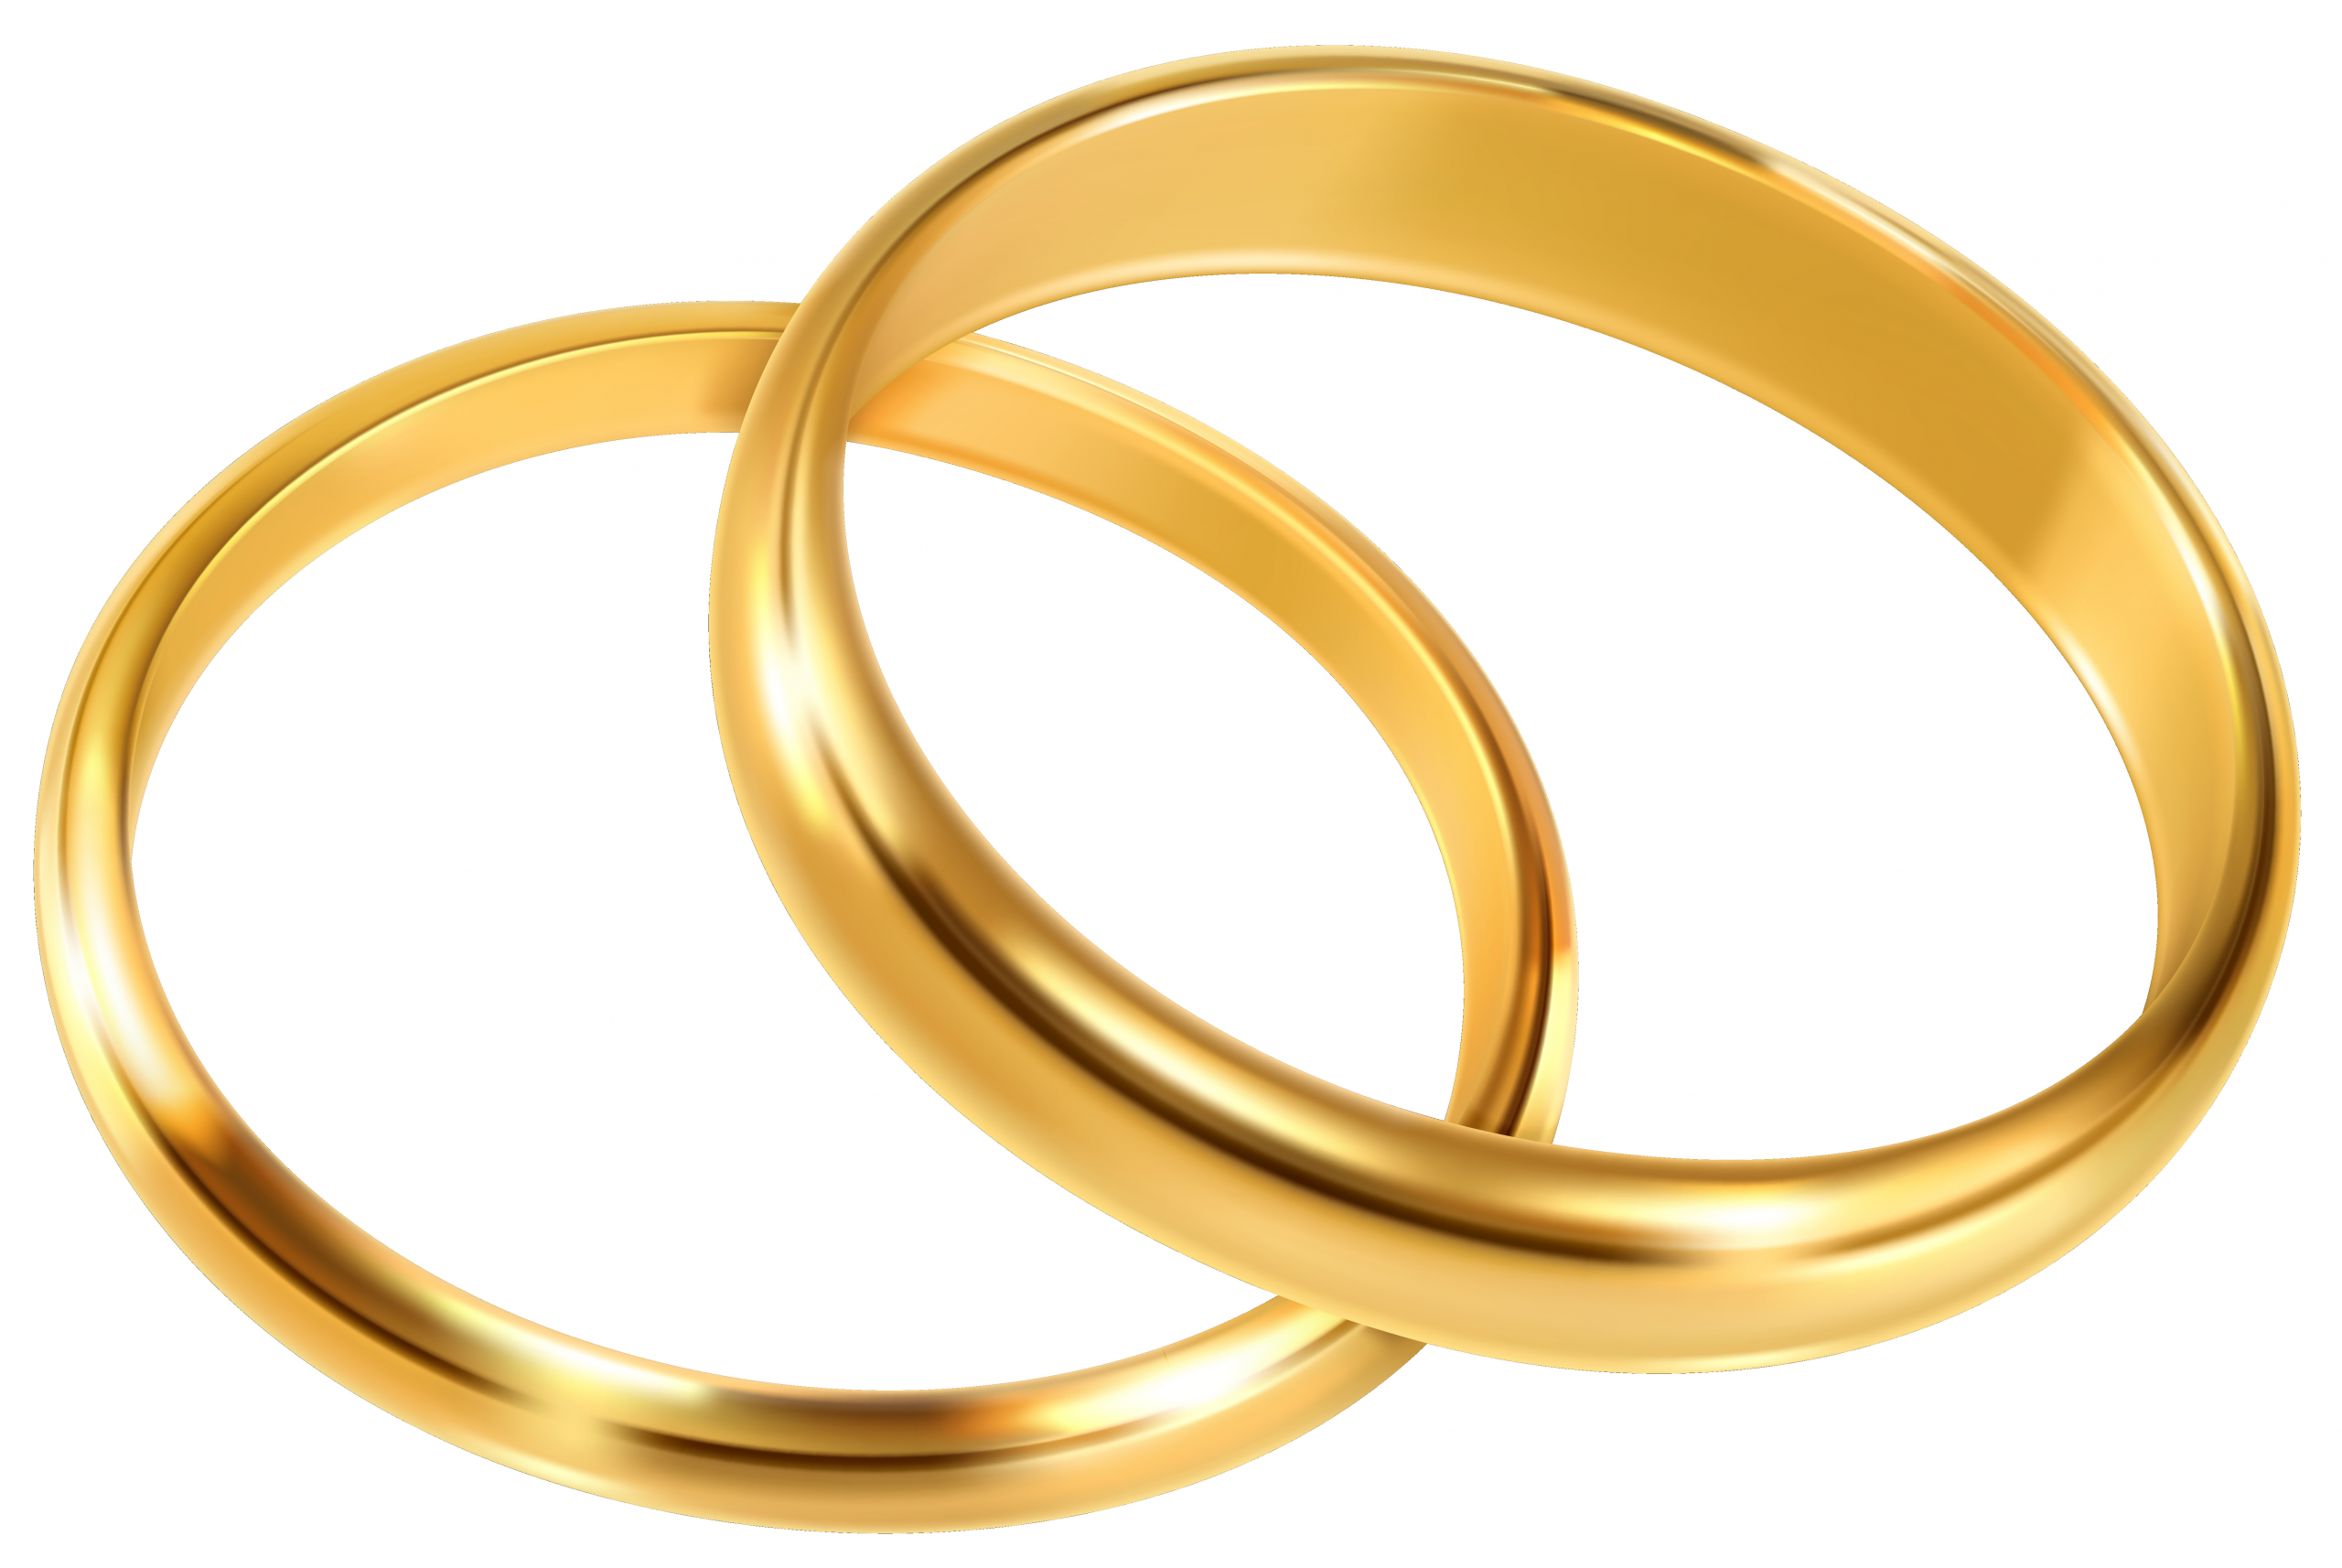 Clipart Wedding Rings
 The best free Wedding clipart images Download from 983